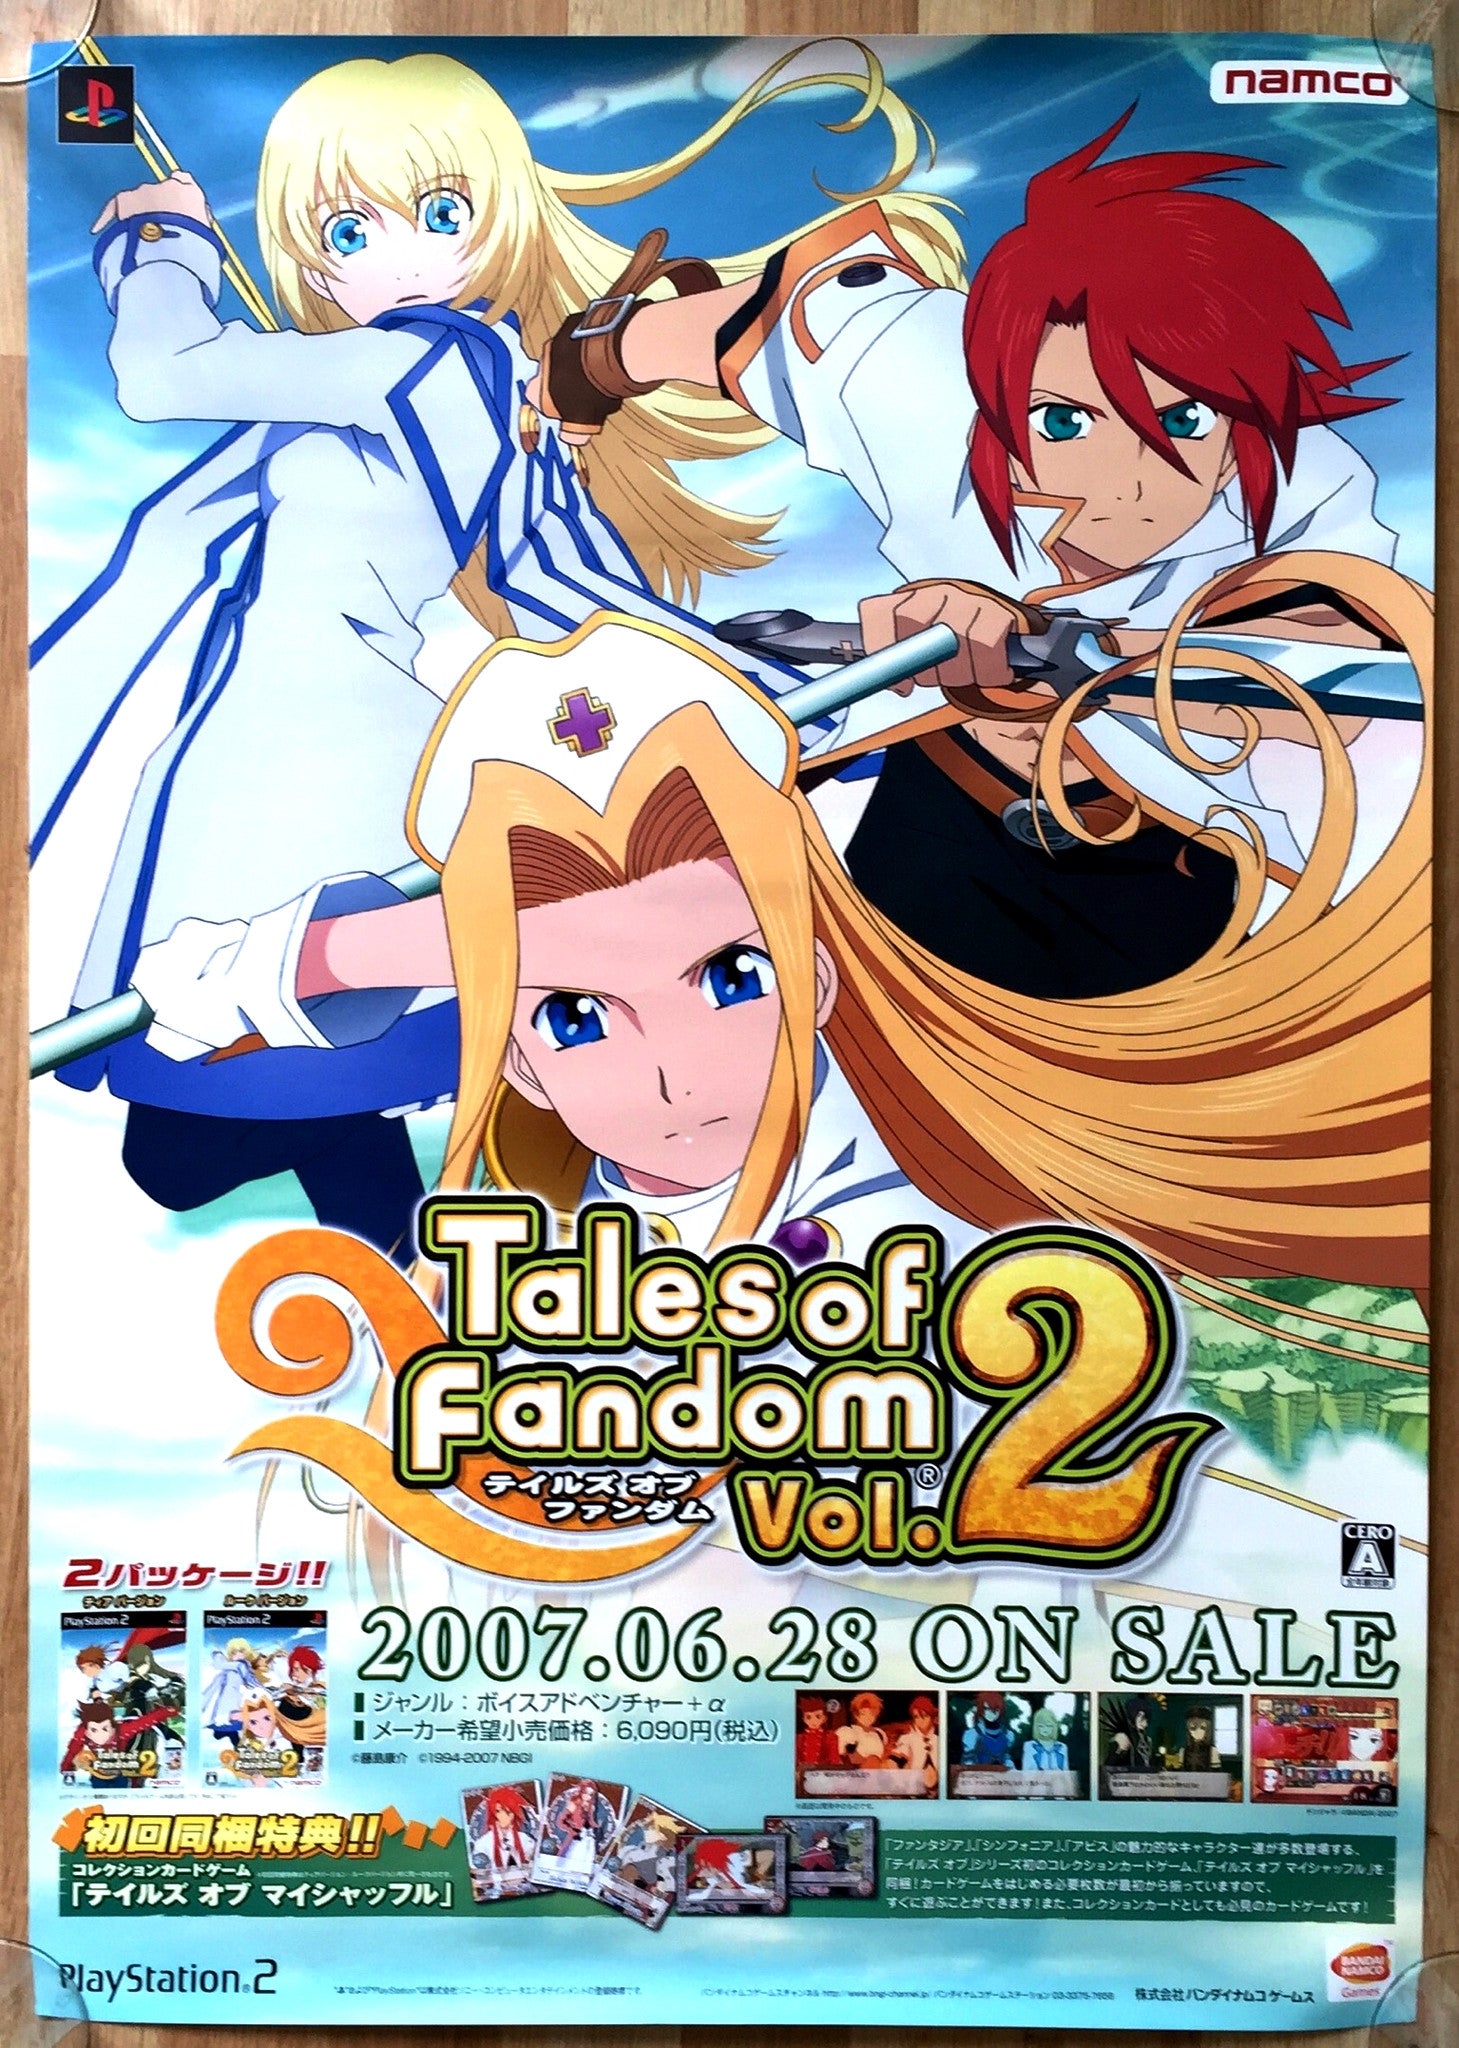 Tales of Fandom Vol.2 (B2) Japanese Promotional Poster #2